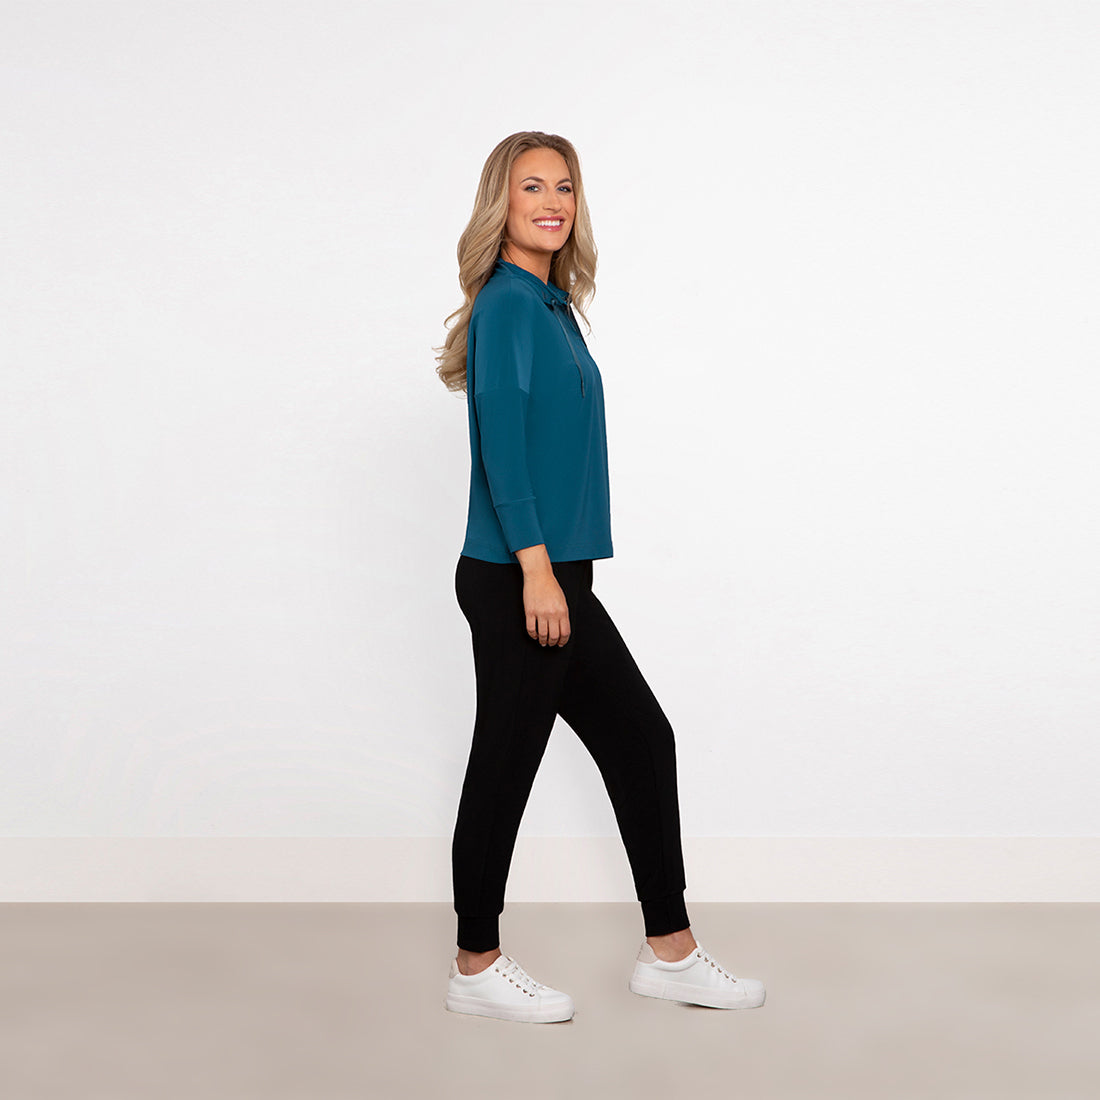 Lynk Pullover, Fall-Winter Tops for Women, Blue/Dragonfly Colour, Sympli Clothing, Toronto, Canada